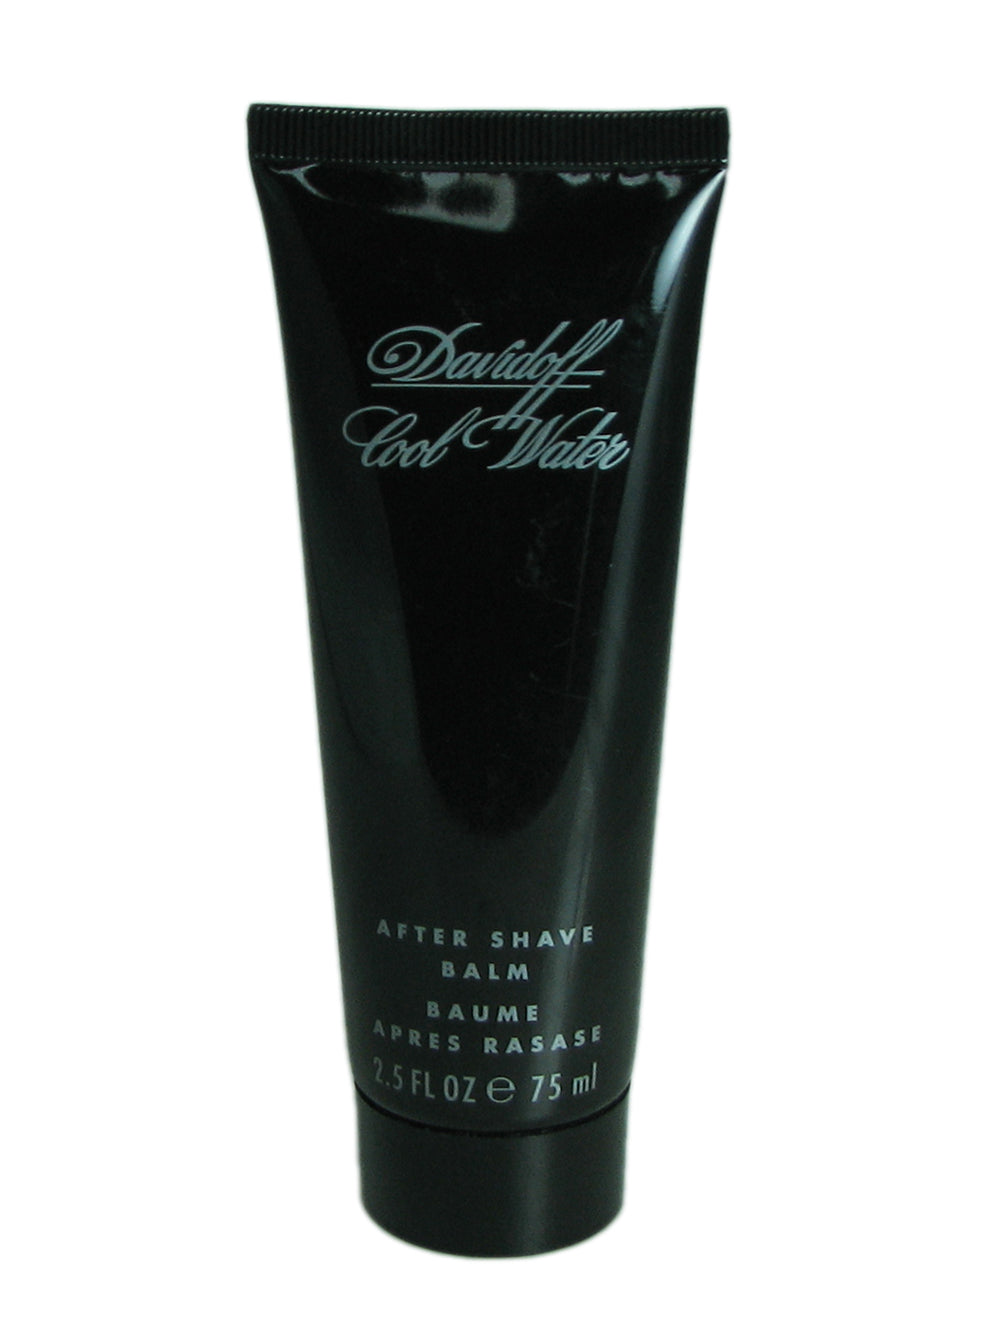 Cool Water for Men by Davidoff 2.5 oz After Shave Balm